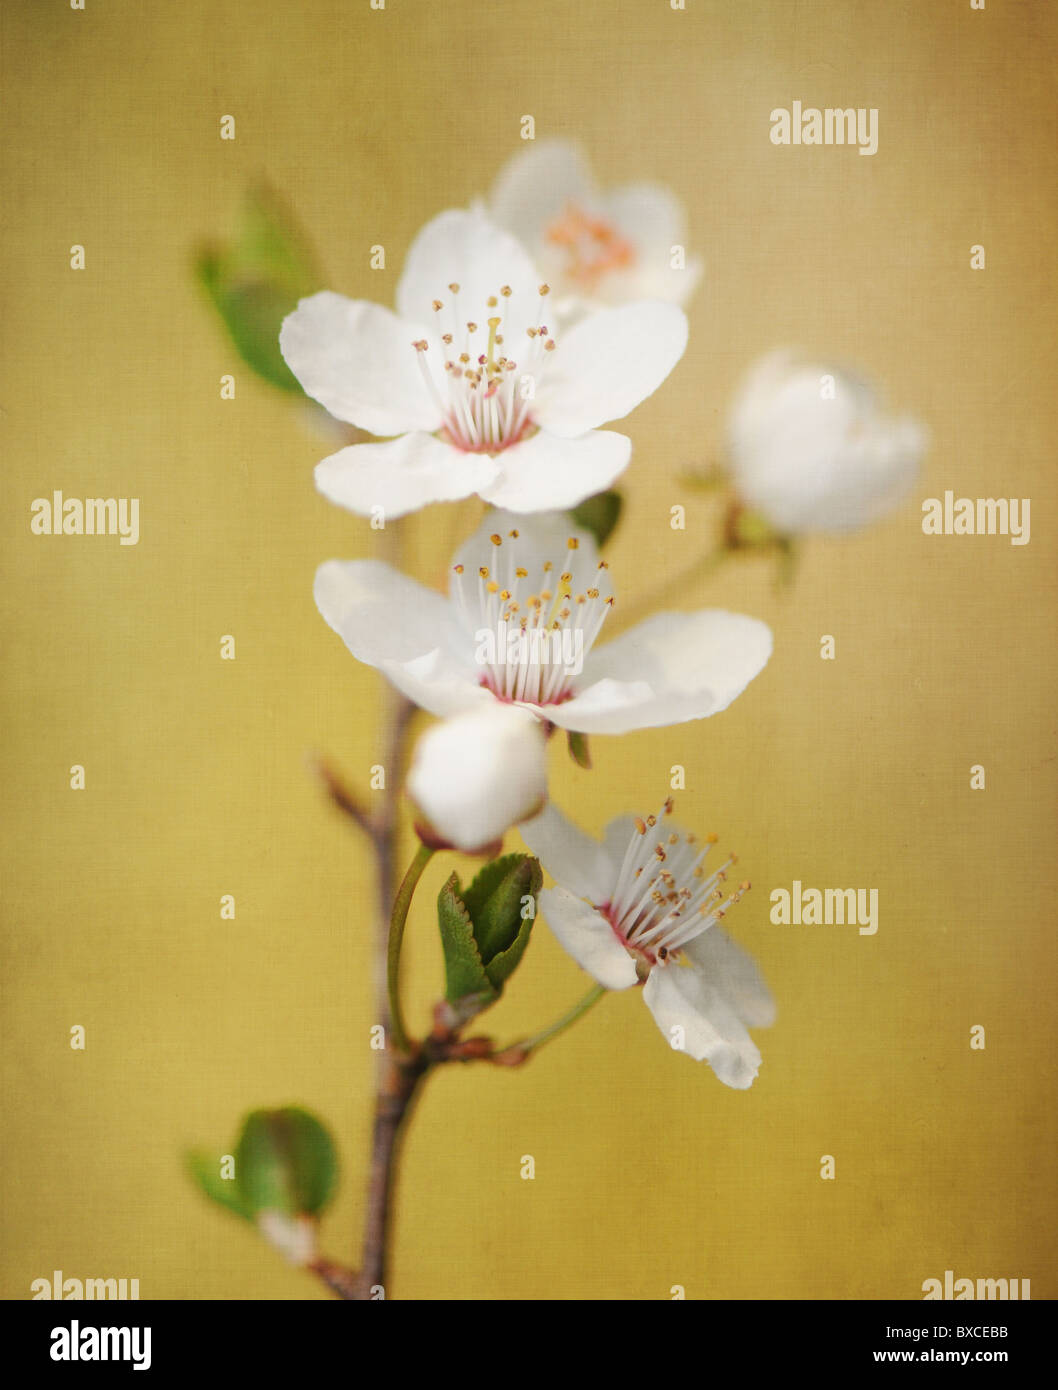 Close-up of white Apple Blossom flowers Banque D'Images